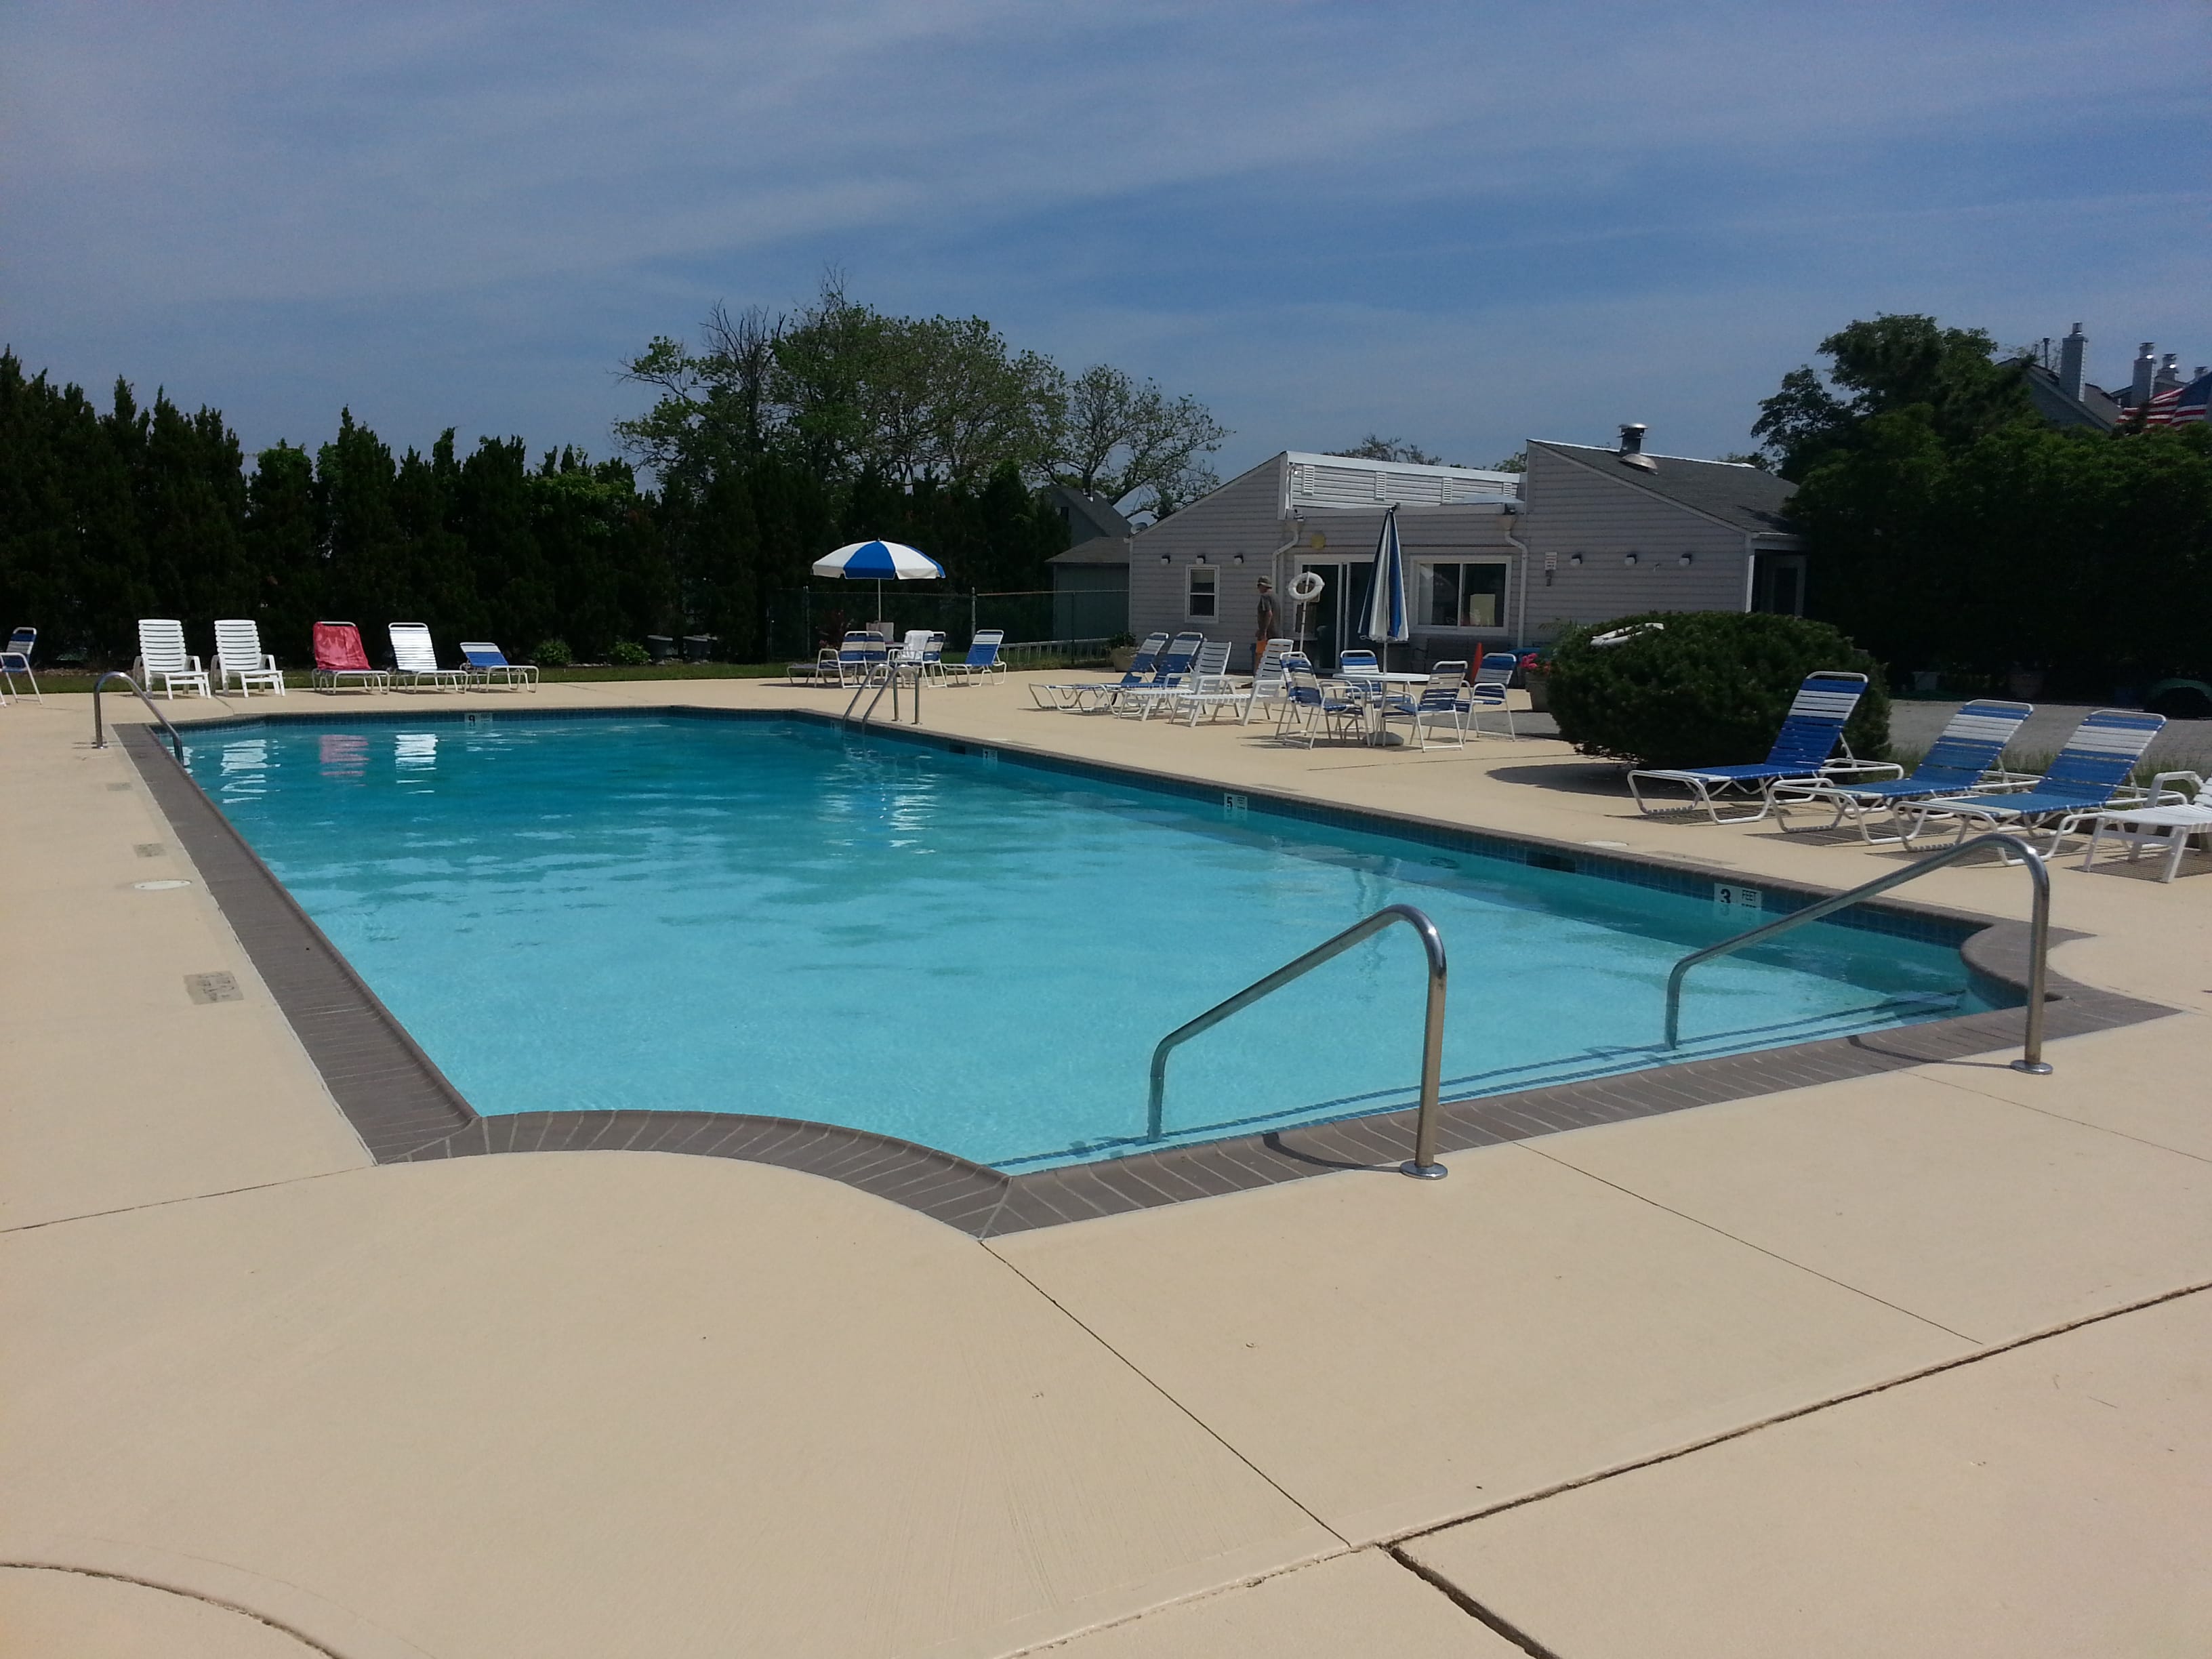 Sands Point North has a large community pool with rest rooms in the pool house.